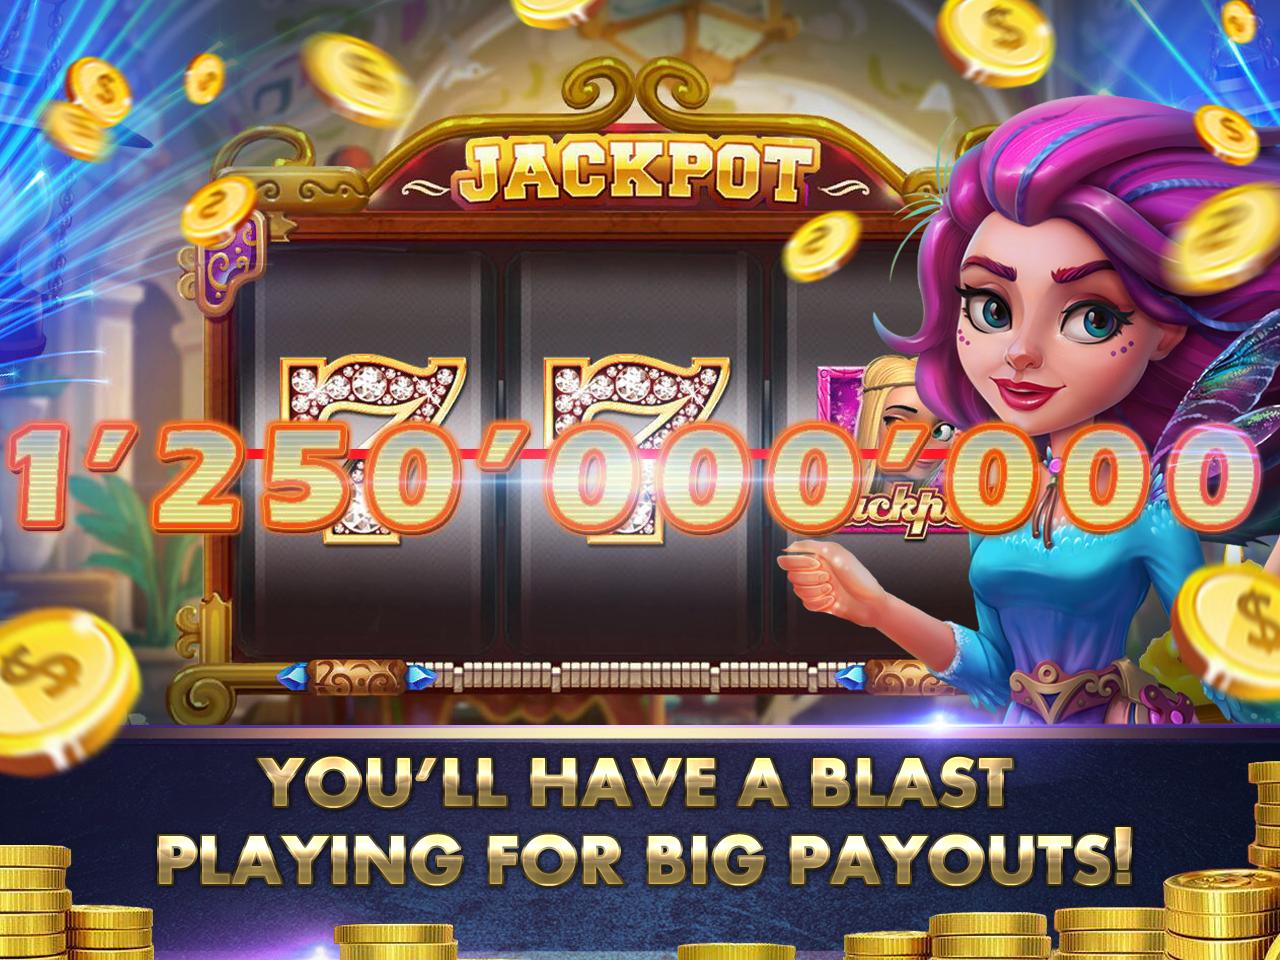 Slot machine games online, free just for fun